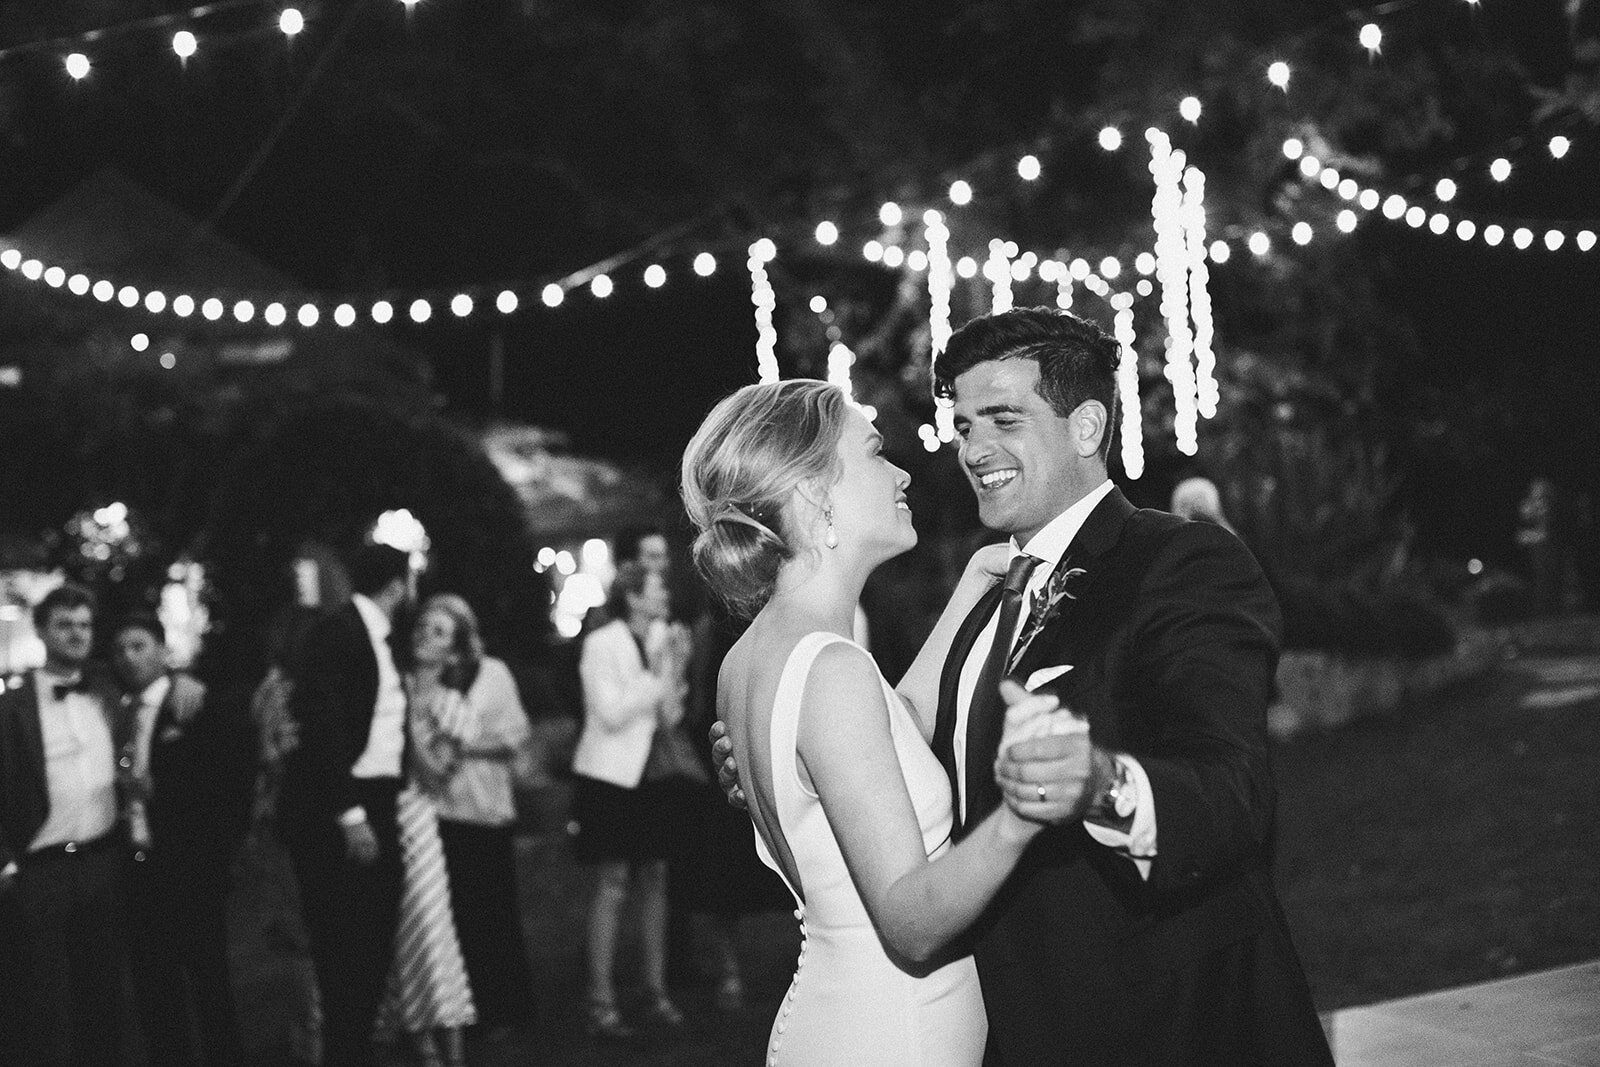 first dance forest wedding fairytale wedding string lights Jenni Grubba Events Bay area Norcal